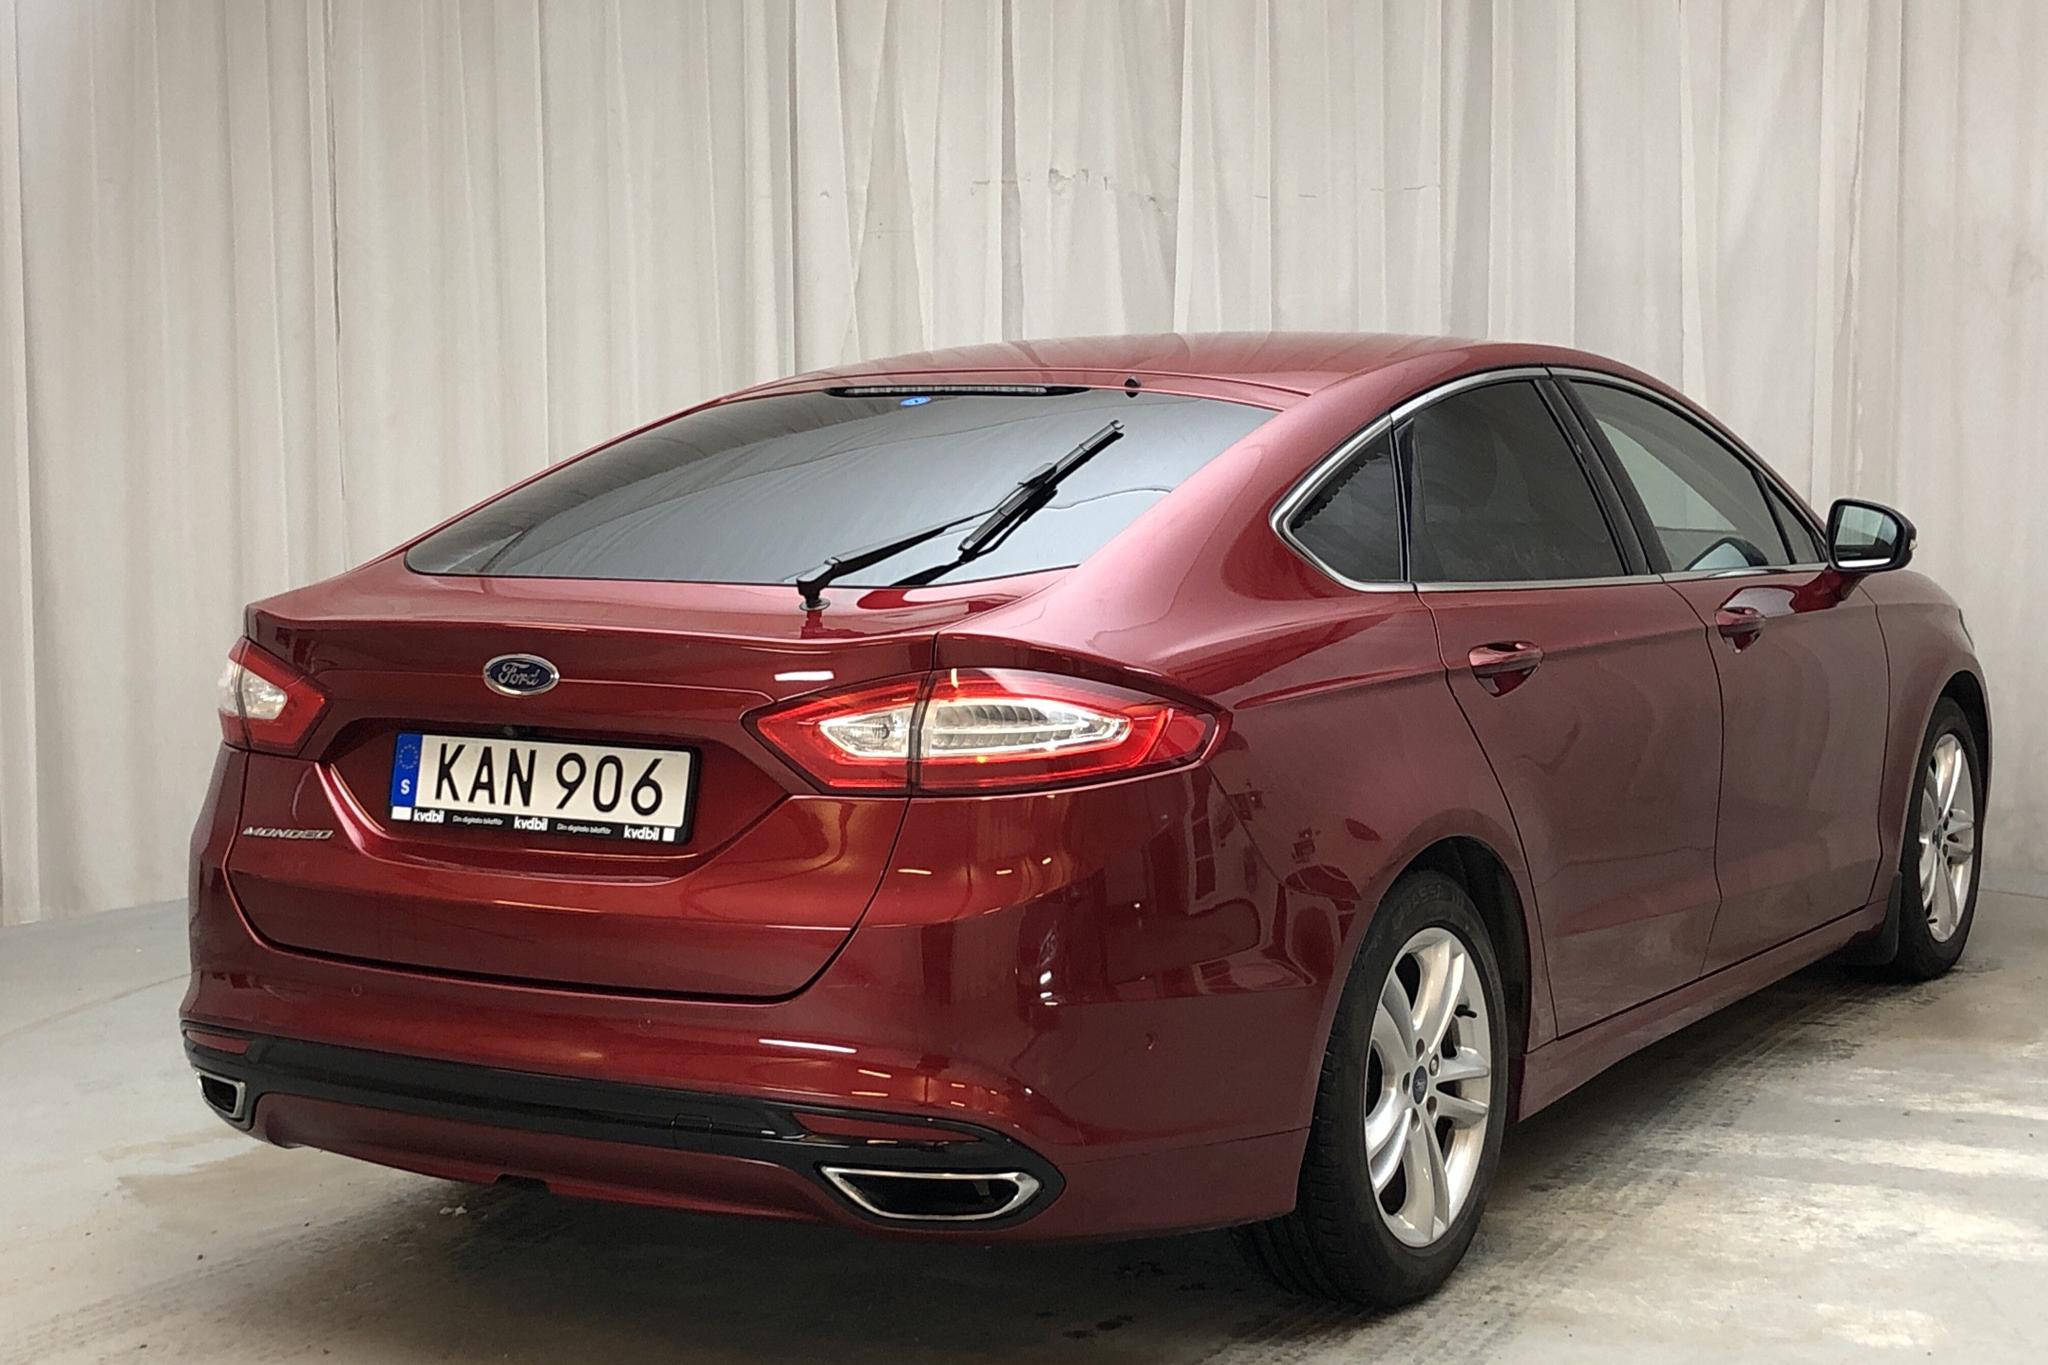 Ford Mondeo 2.0 TDCi 5dr (180hk) - 169 000 km - Automatic - red - 2016